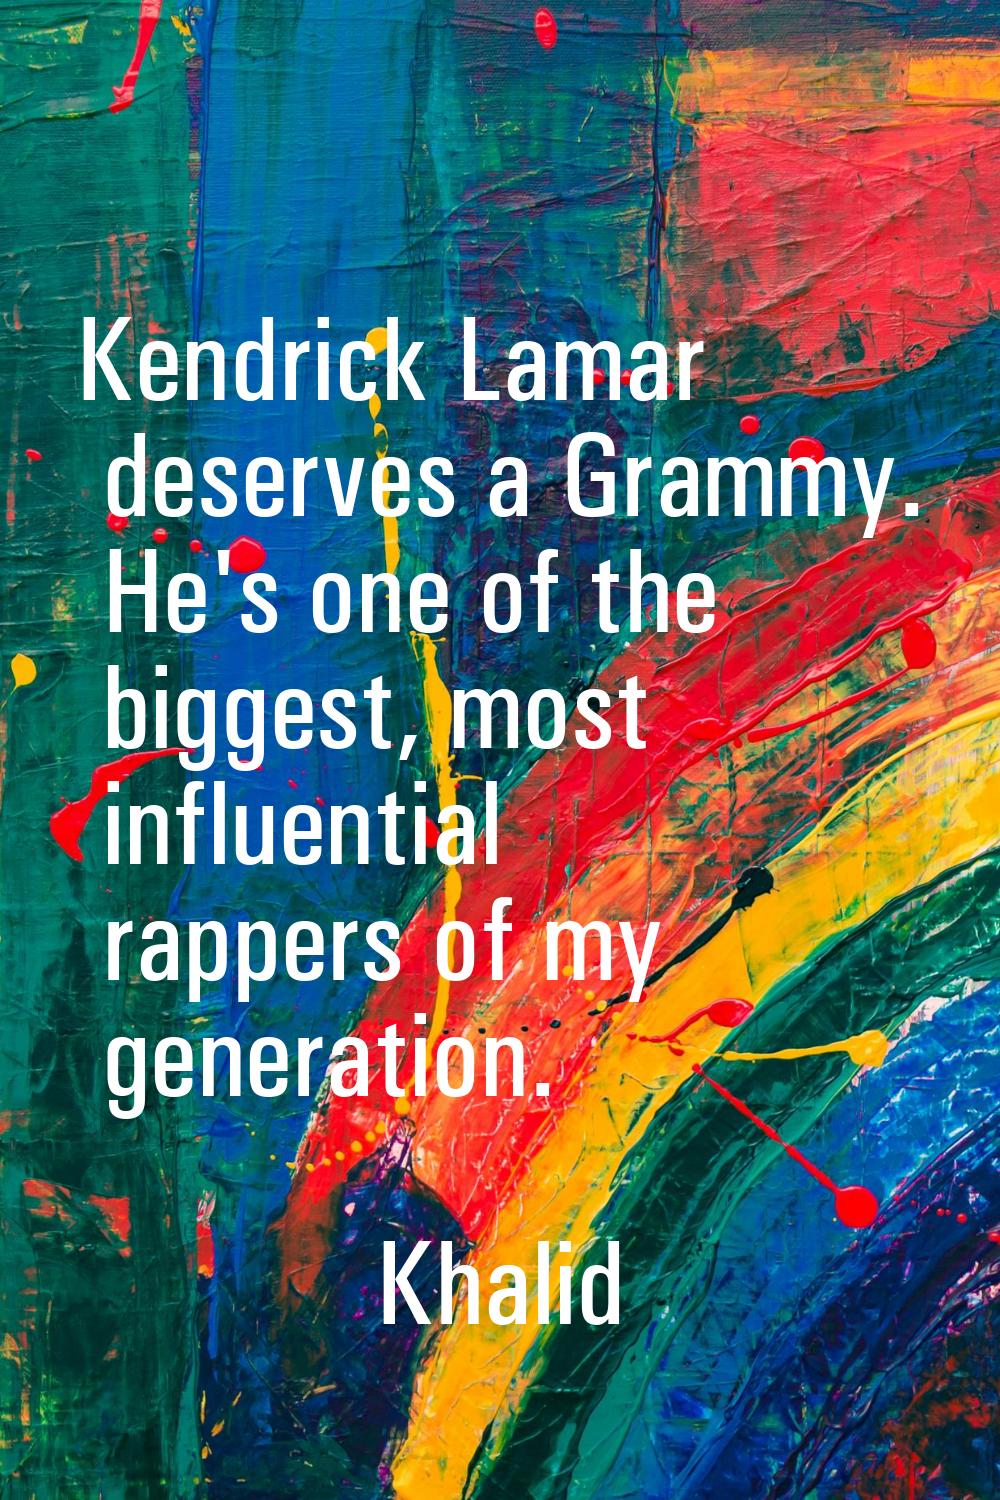 Kendrick Lamar deserves a Grammy. He's one of the biggest, most influential rappers of my generatio